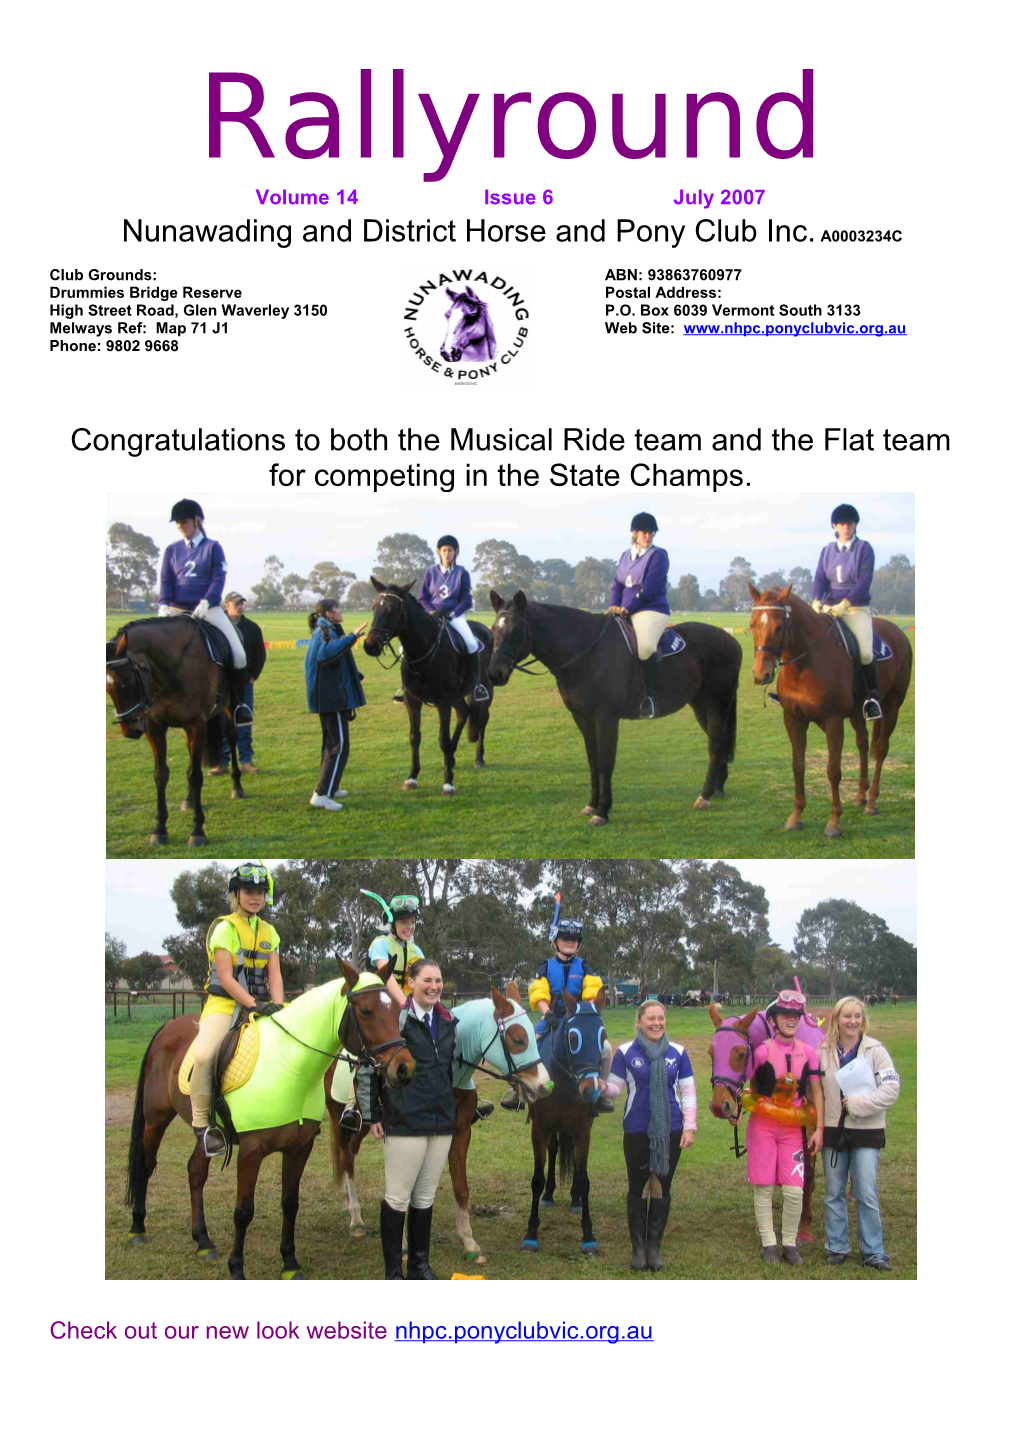 Check out Our New Look Website Nhpc.Ponyclubvic.Org.Au